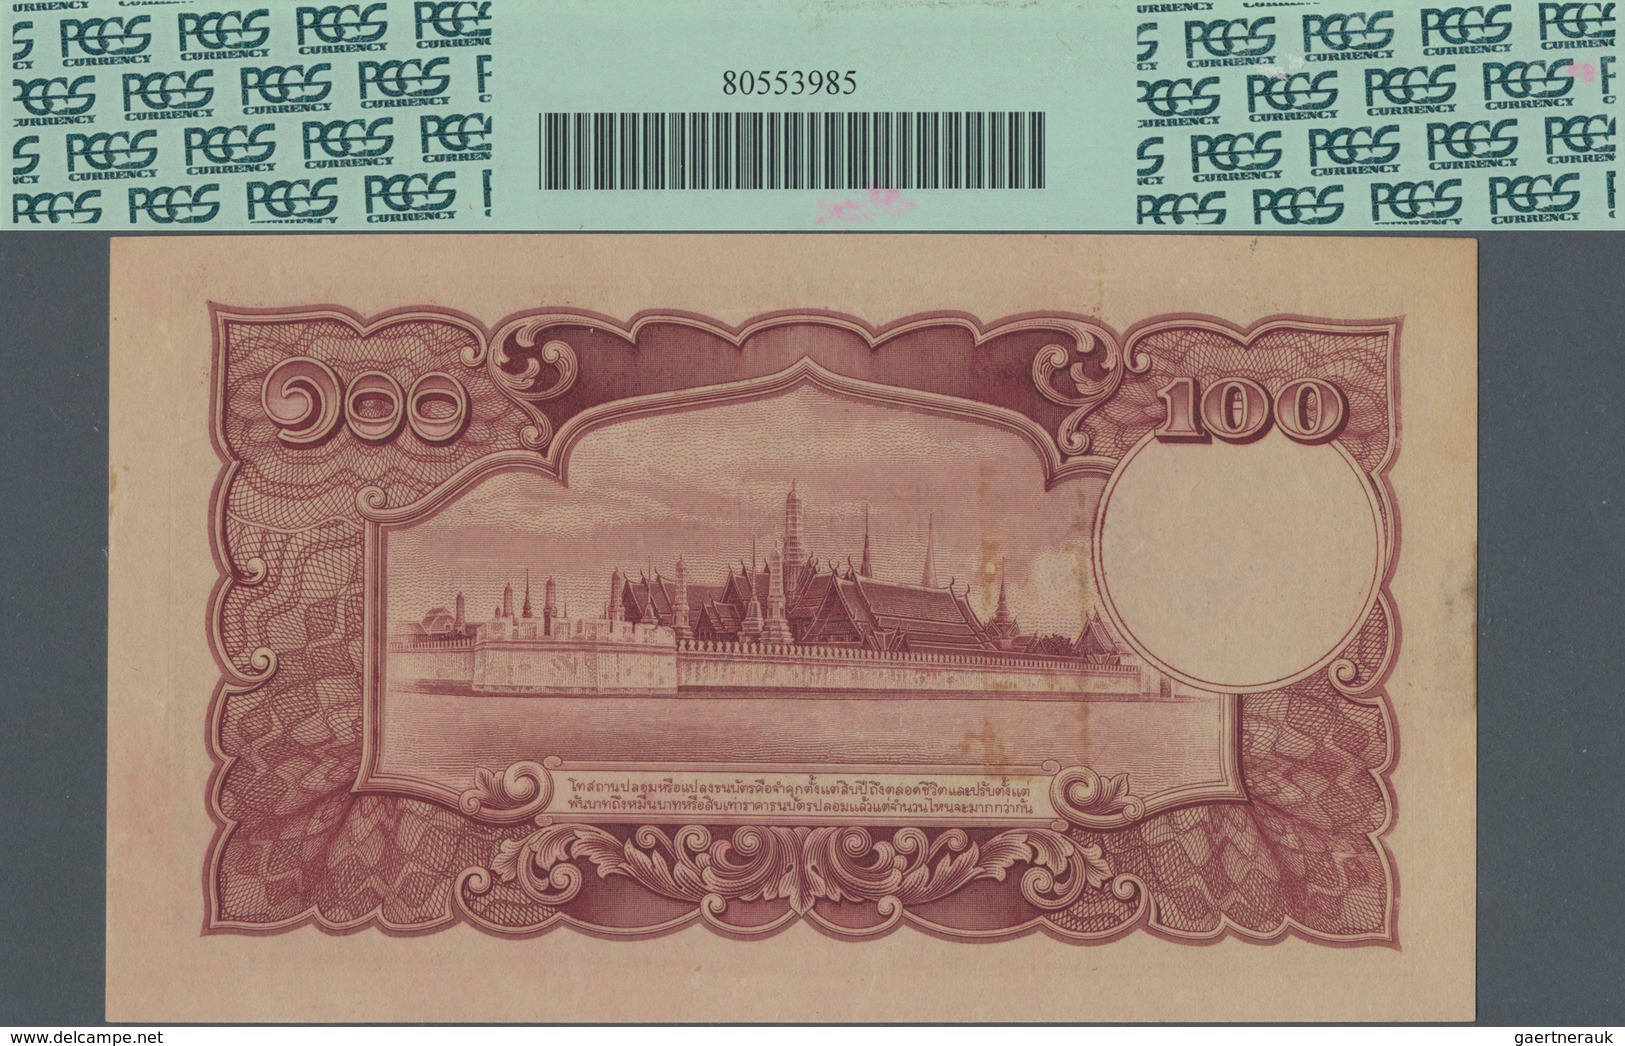 Thailand: Government Of Thailand 100 Baht ND(1943) SPECIMEN, P.51s1with Serial Number S/29 00000 And - Tailandia